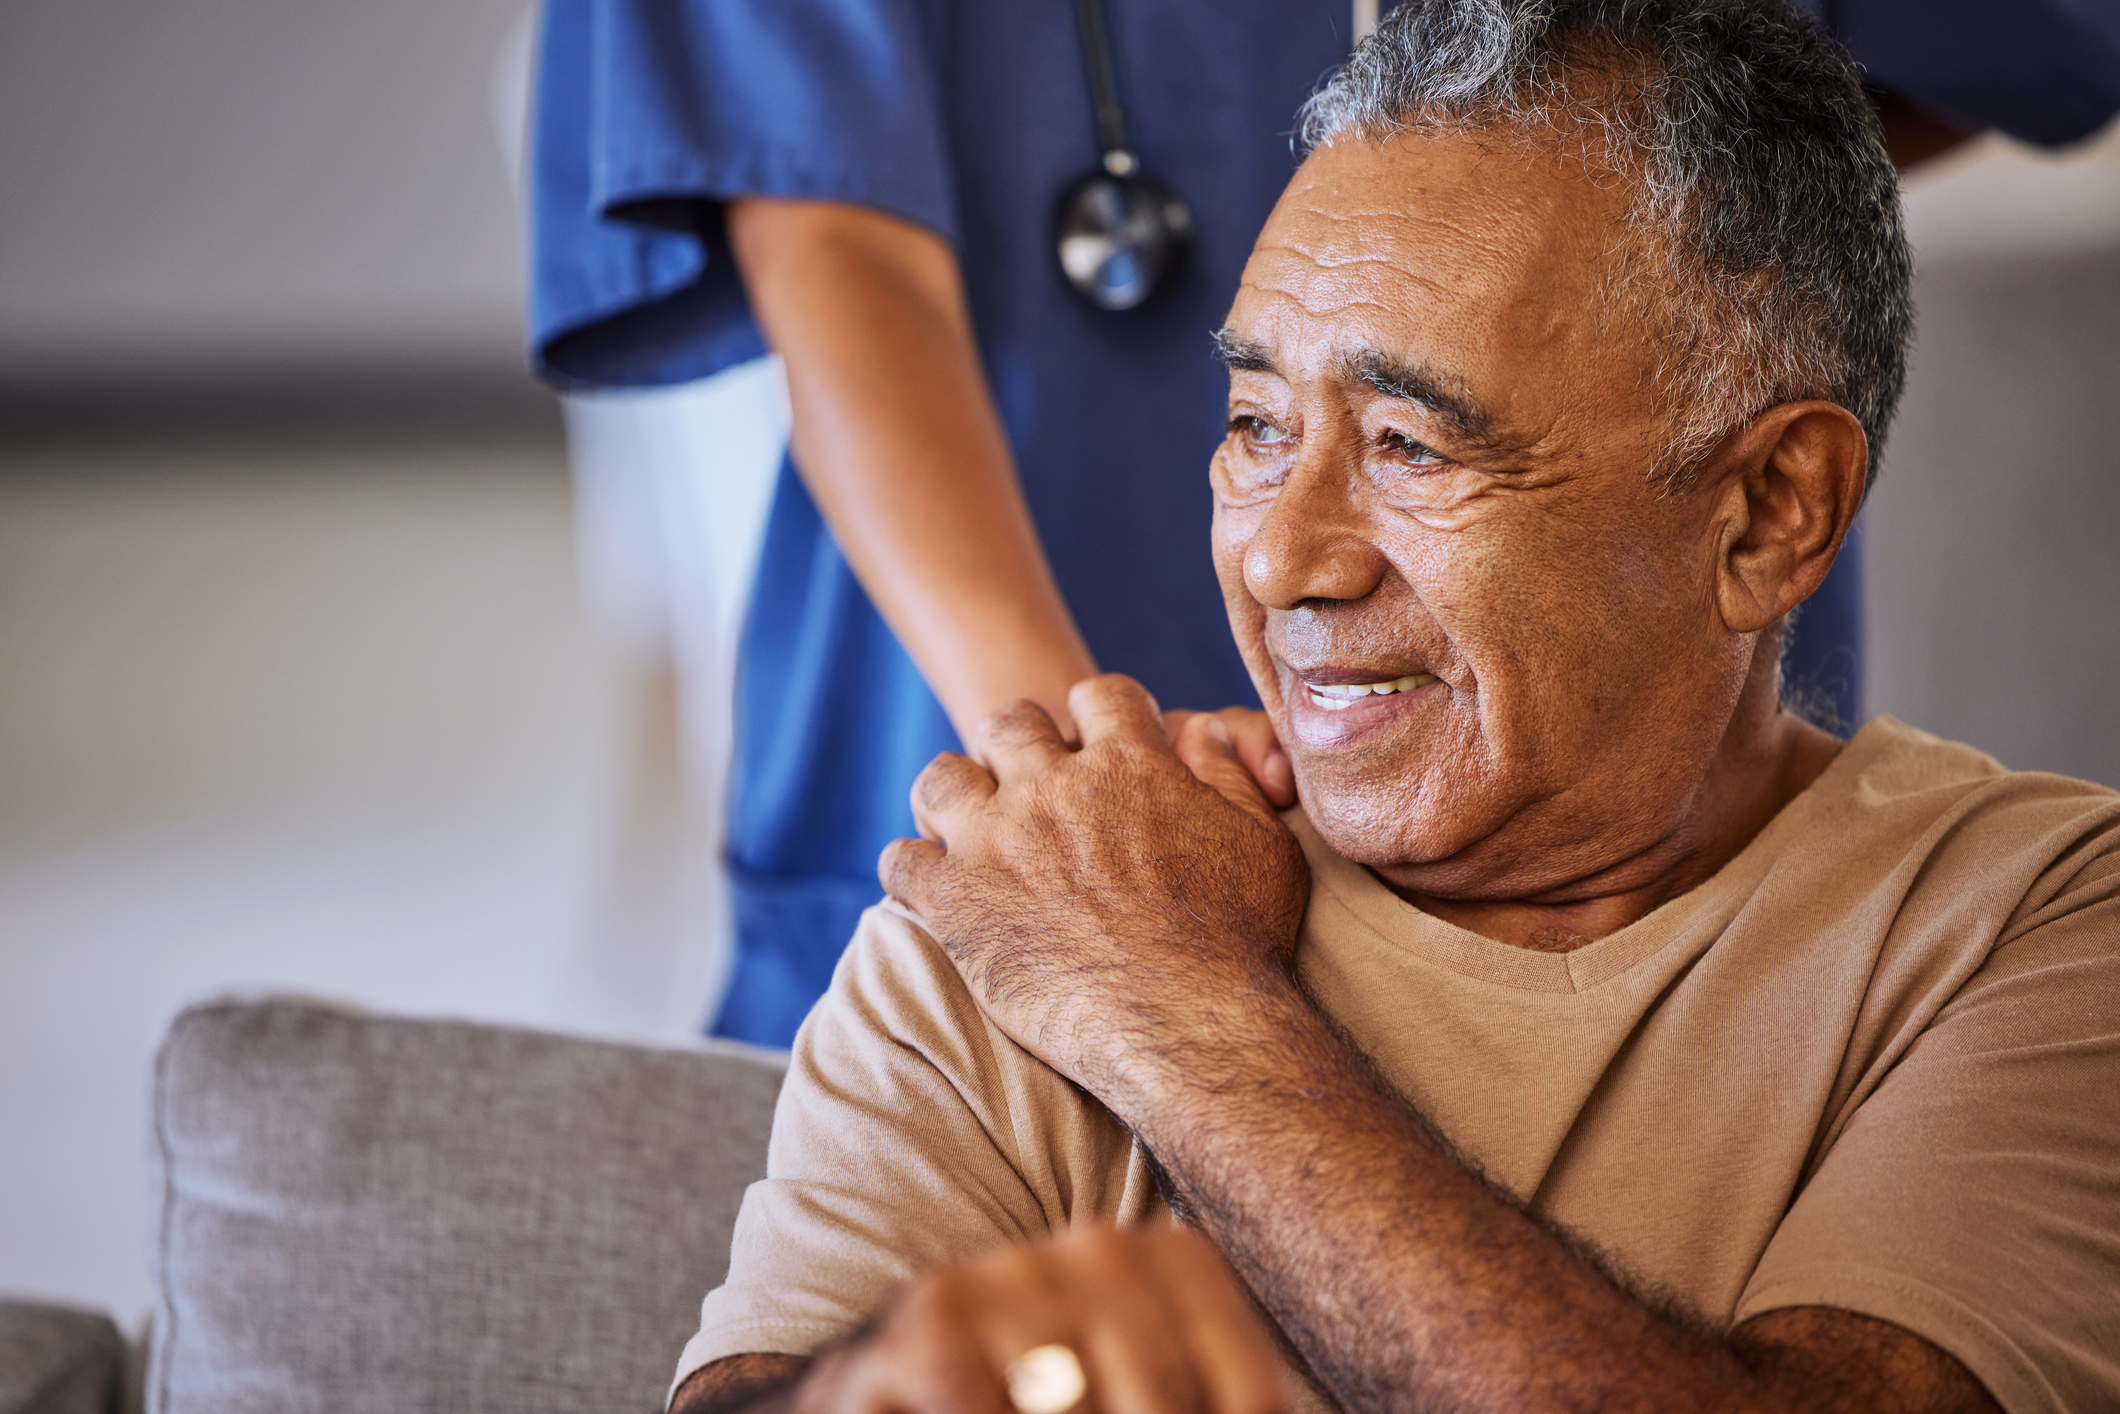 An old man in a nursing home looks off into the distance, confused or concerned, while a nurse in blue scrubs holds his hand